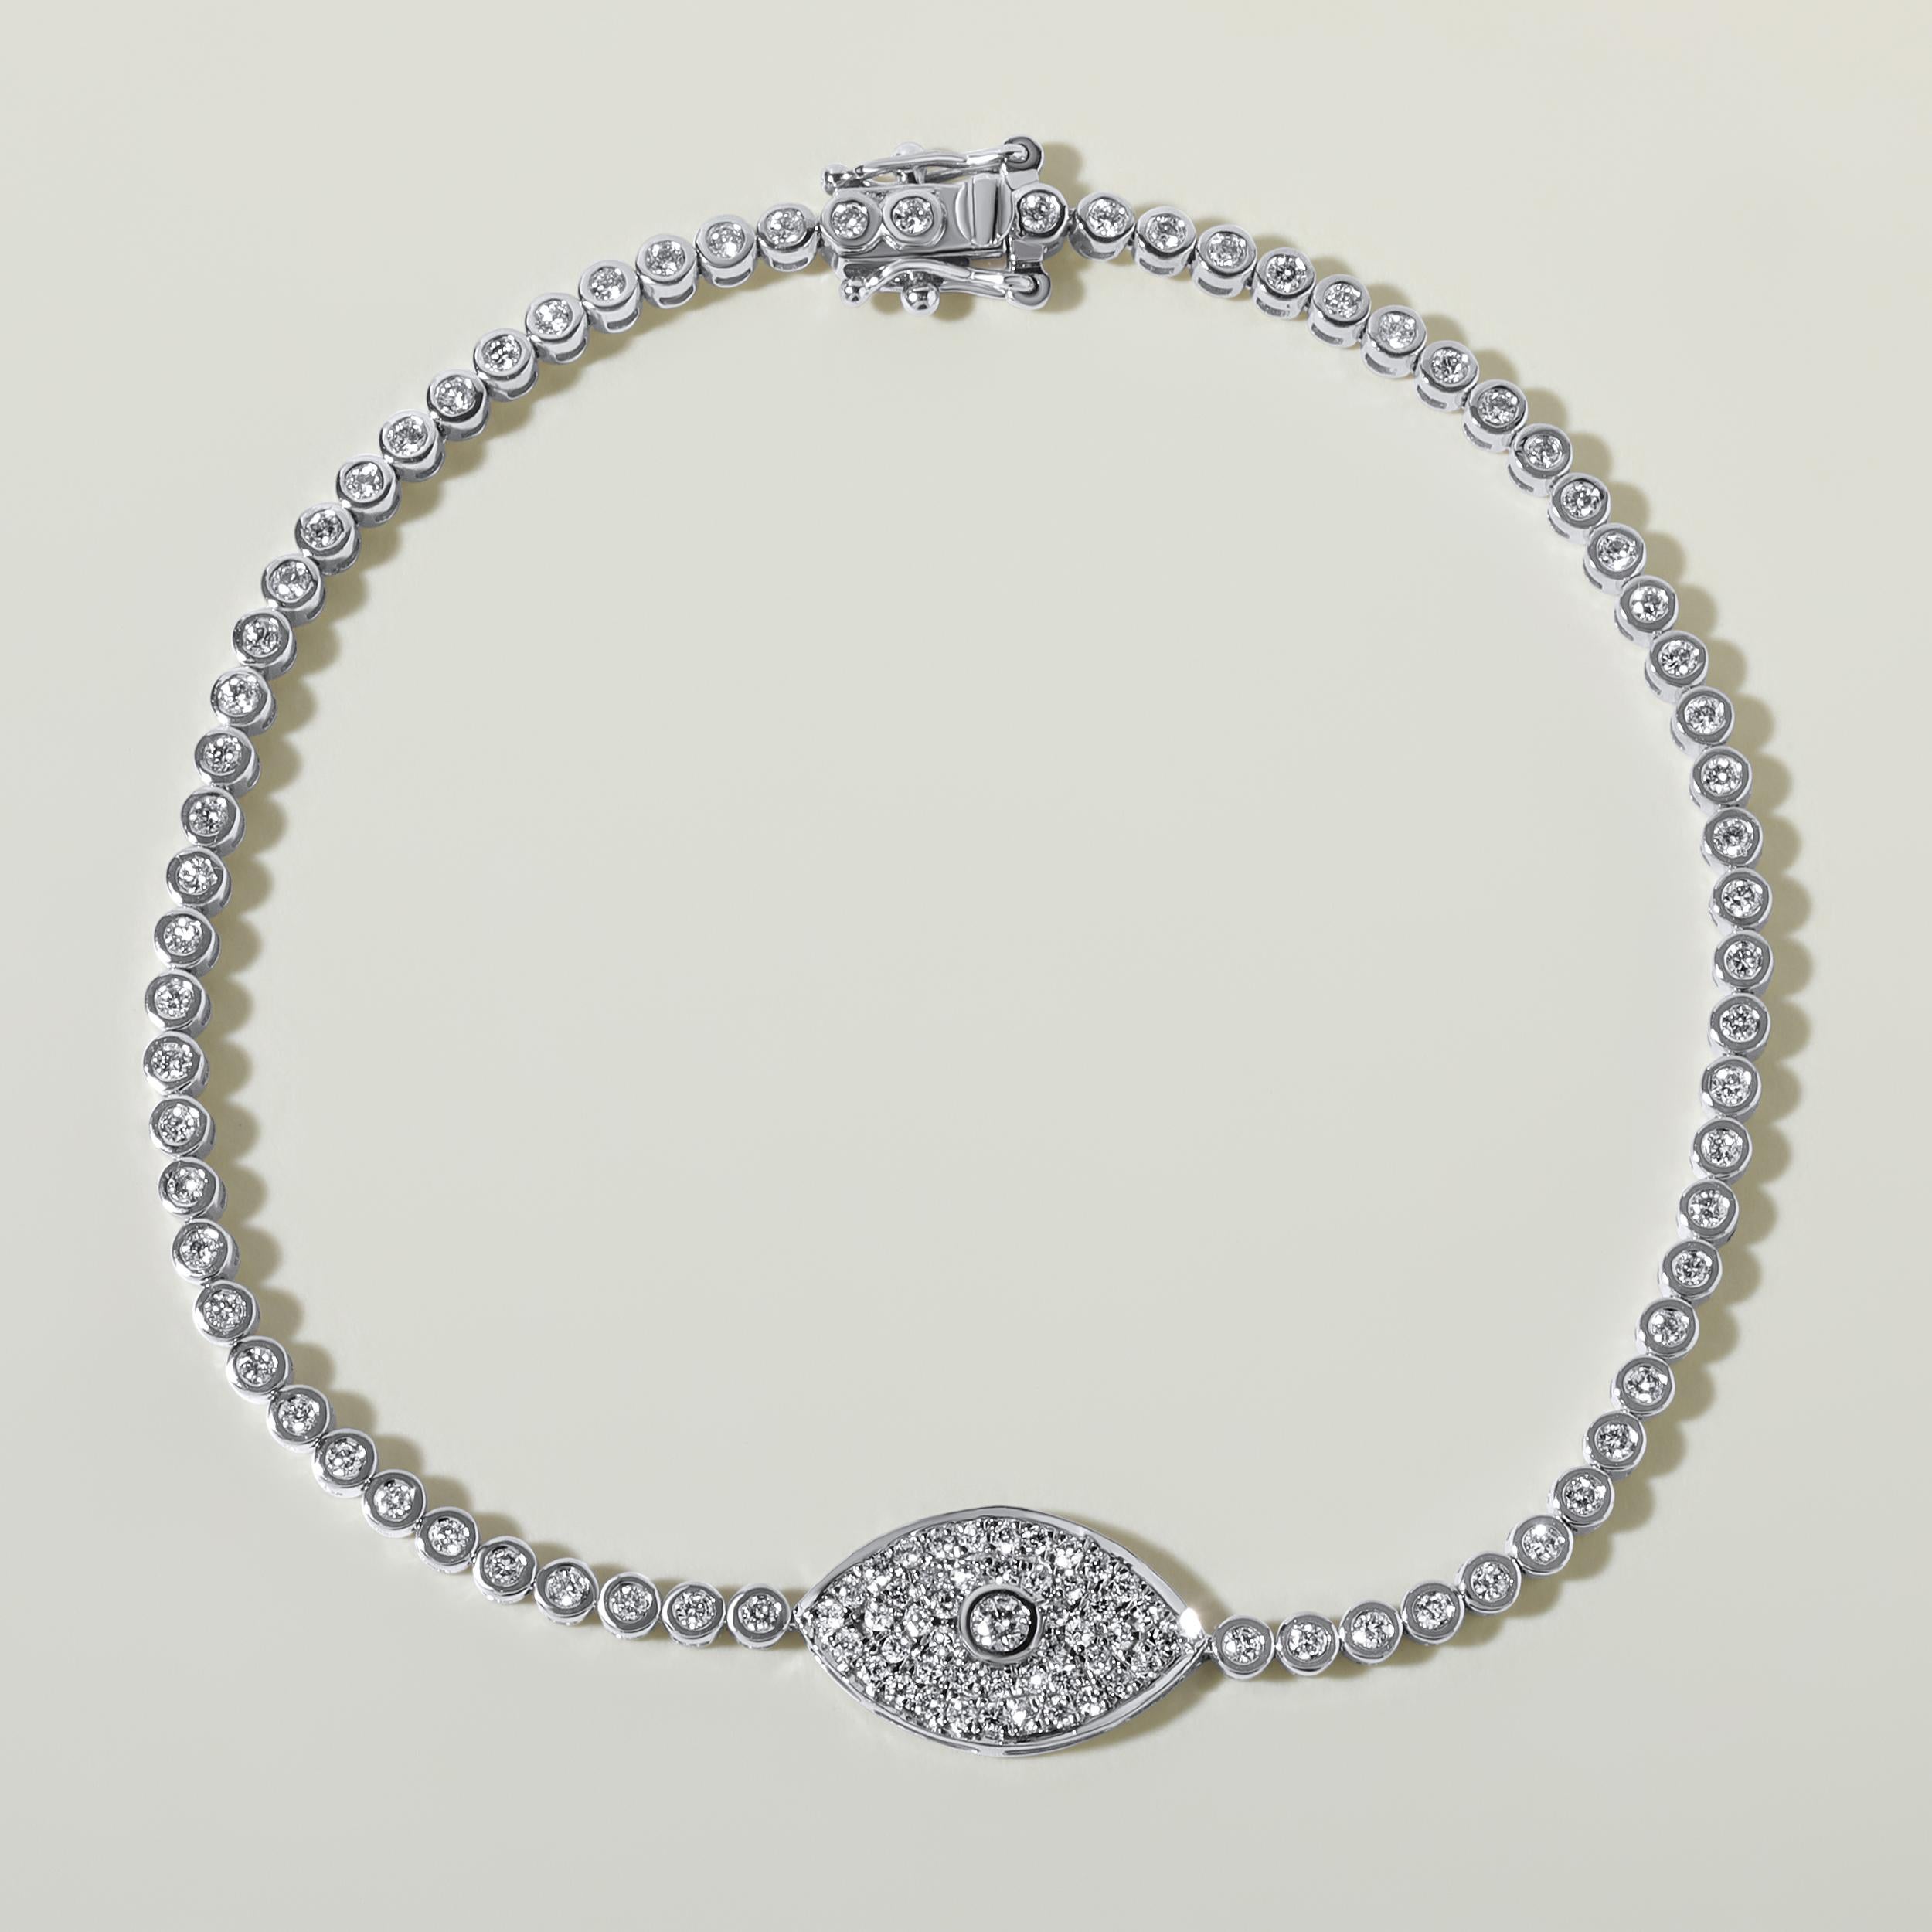 Crafted in 5.73 grams of 14K White Gold, the bracelet contains 116 stones of Round Natural Diamonds with a total of 0.97 carat in F-G color and SI clarity. The bracelet length is 7 inches.

CONTEMPORARY AND TIMELESS ESSENCE: Crafted in